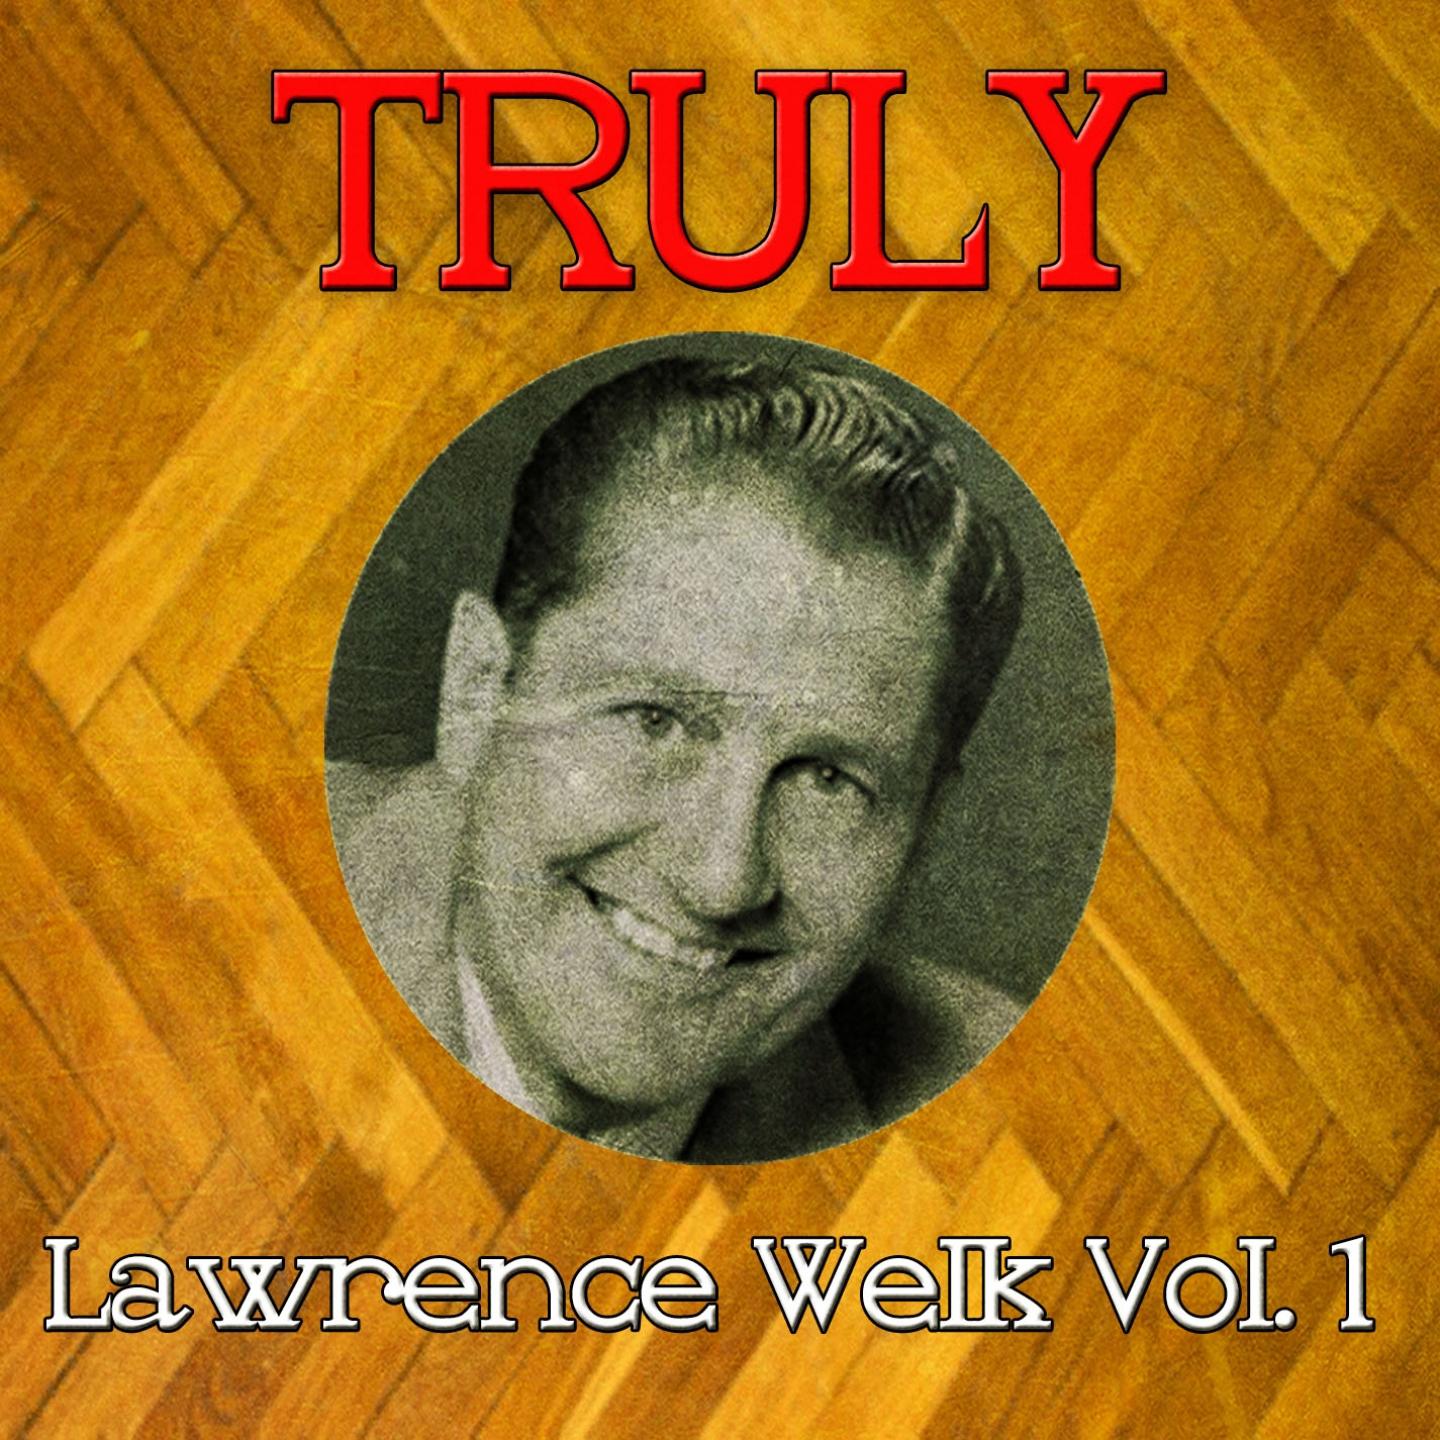 Truly Lawrence Welk, Vol. 1